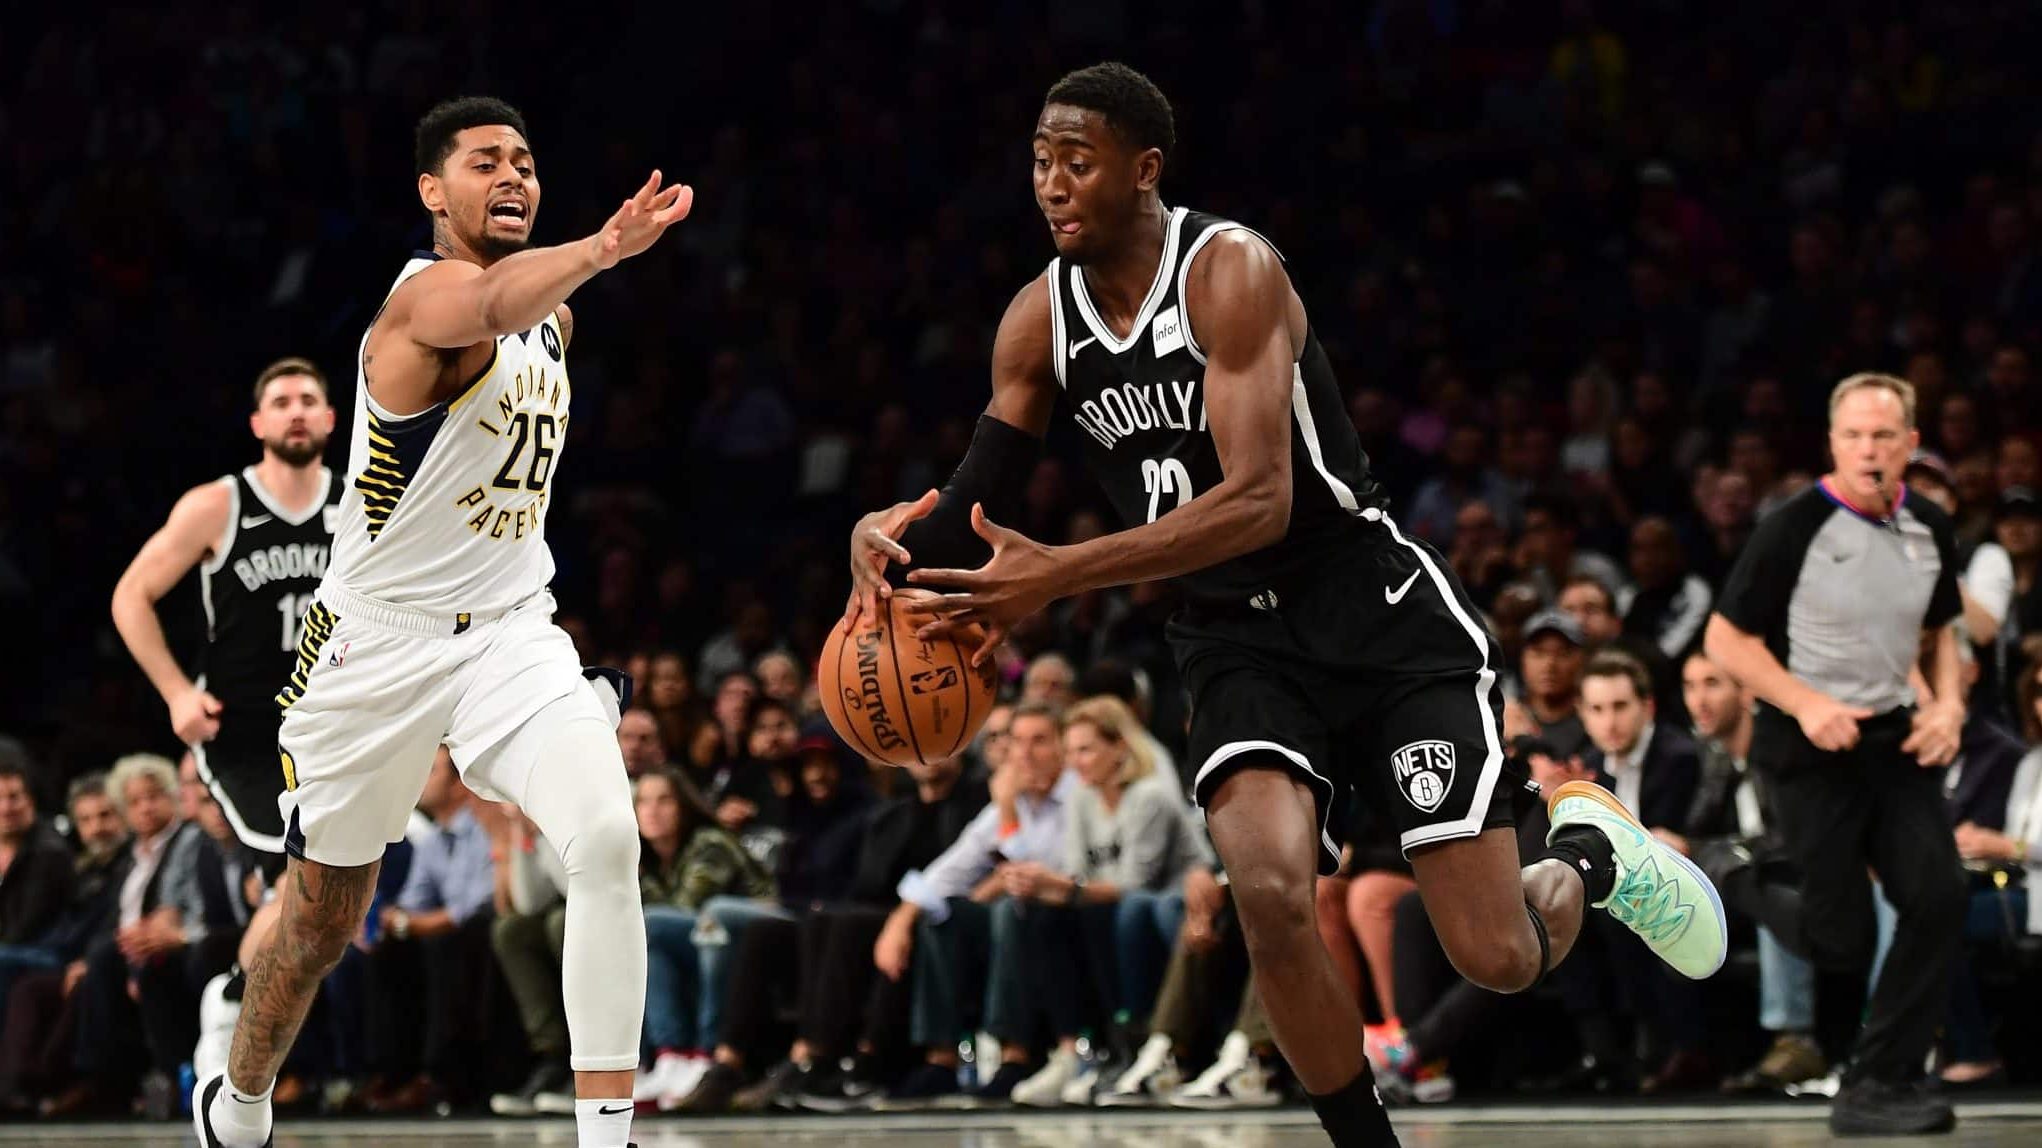 NEW YORK, NEW YORK - OCTOBER 30: Caris LeVert #22 of the Brooklyn Nets takes control of the ball as Jeremy Lamb #26 of the Indiana Pacers guards him during the first half of their game at Barclays Center on October 30, 2019 in the Brooklyn borough of New York City. NOTE TO USER: User expressly acknowledges and agrees that, by downloading and or using this Photograph, user is consenting to the terms and conditions of the Getty Images License Agreement.